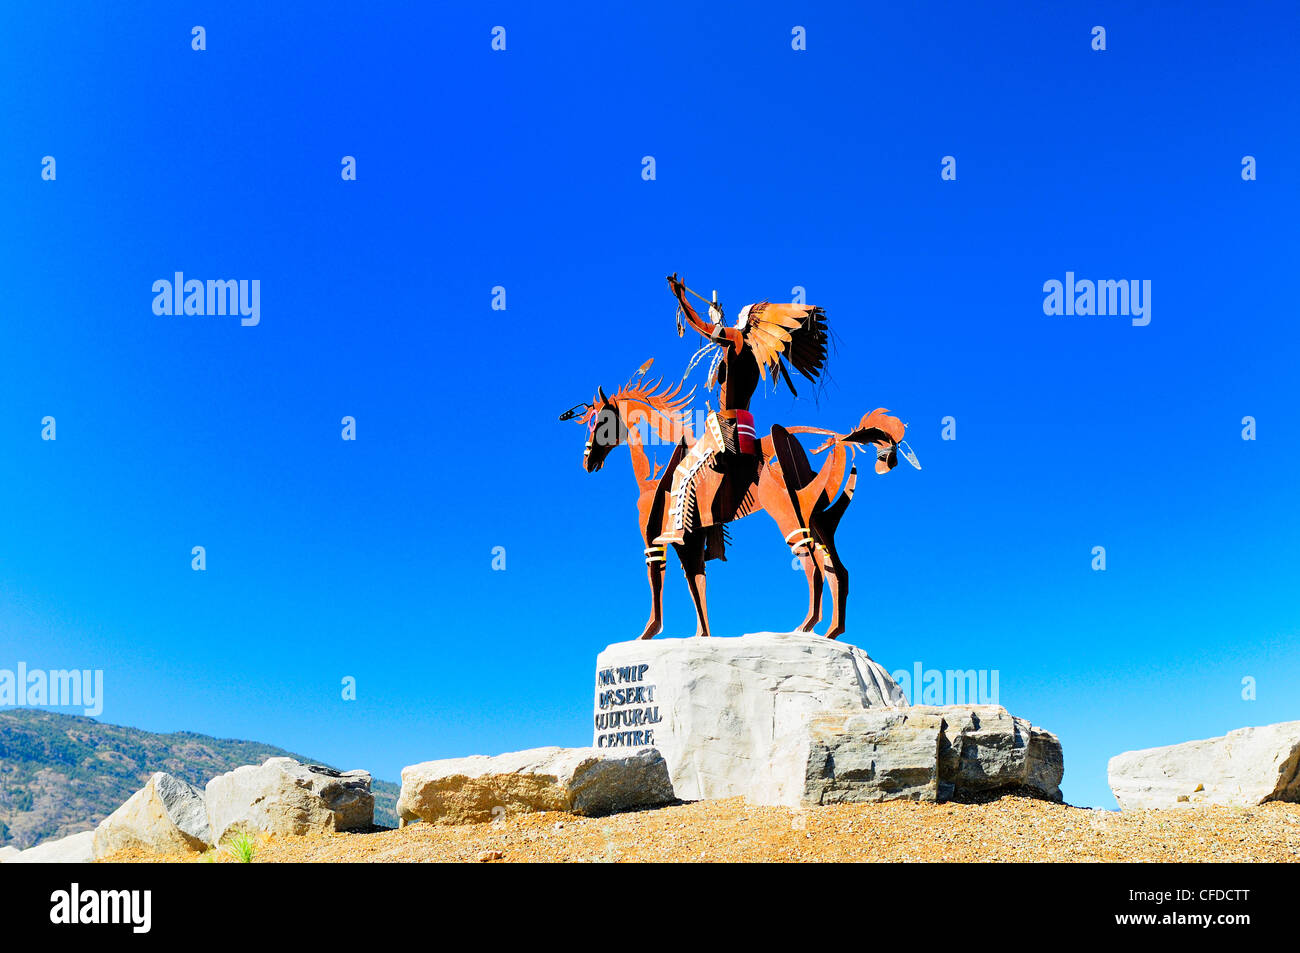 A statue of a native Indian with head dress, on a horse at Nk'Mip Desert Cultural Centre, Osoyoos, British Columbia, Canada Stock Photo